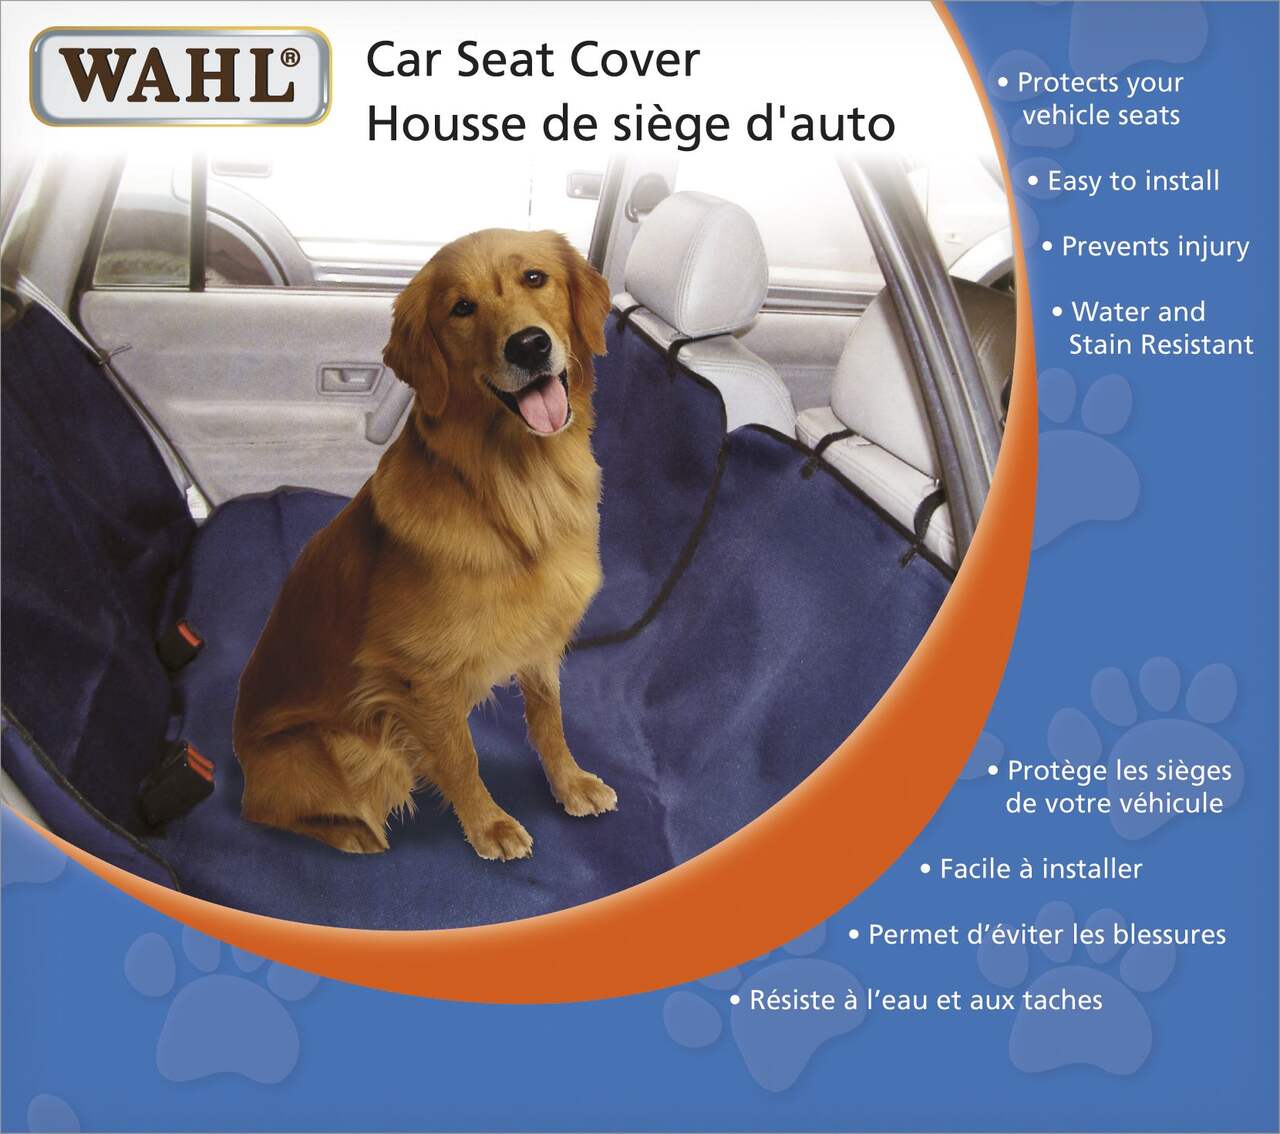 https://media-www.canadiantire.ca/product/living/pet-care/pet-accessories/1420688/car-seat-cover-7fdb730e-547e-4596-ab5d-a6c94078db96-jpgrendition.jpg?imdensity=1&imwidth=640&impolicy=mZoom